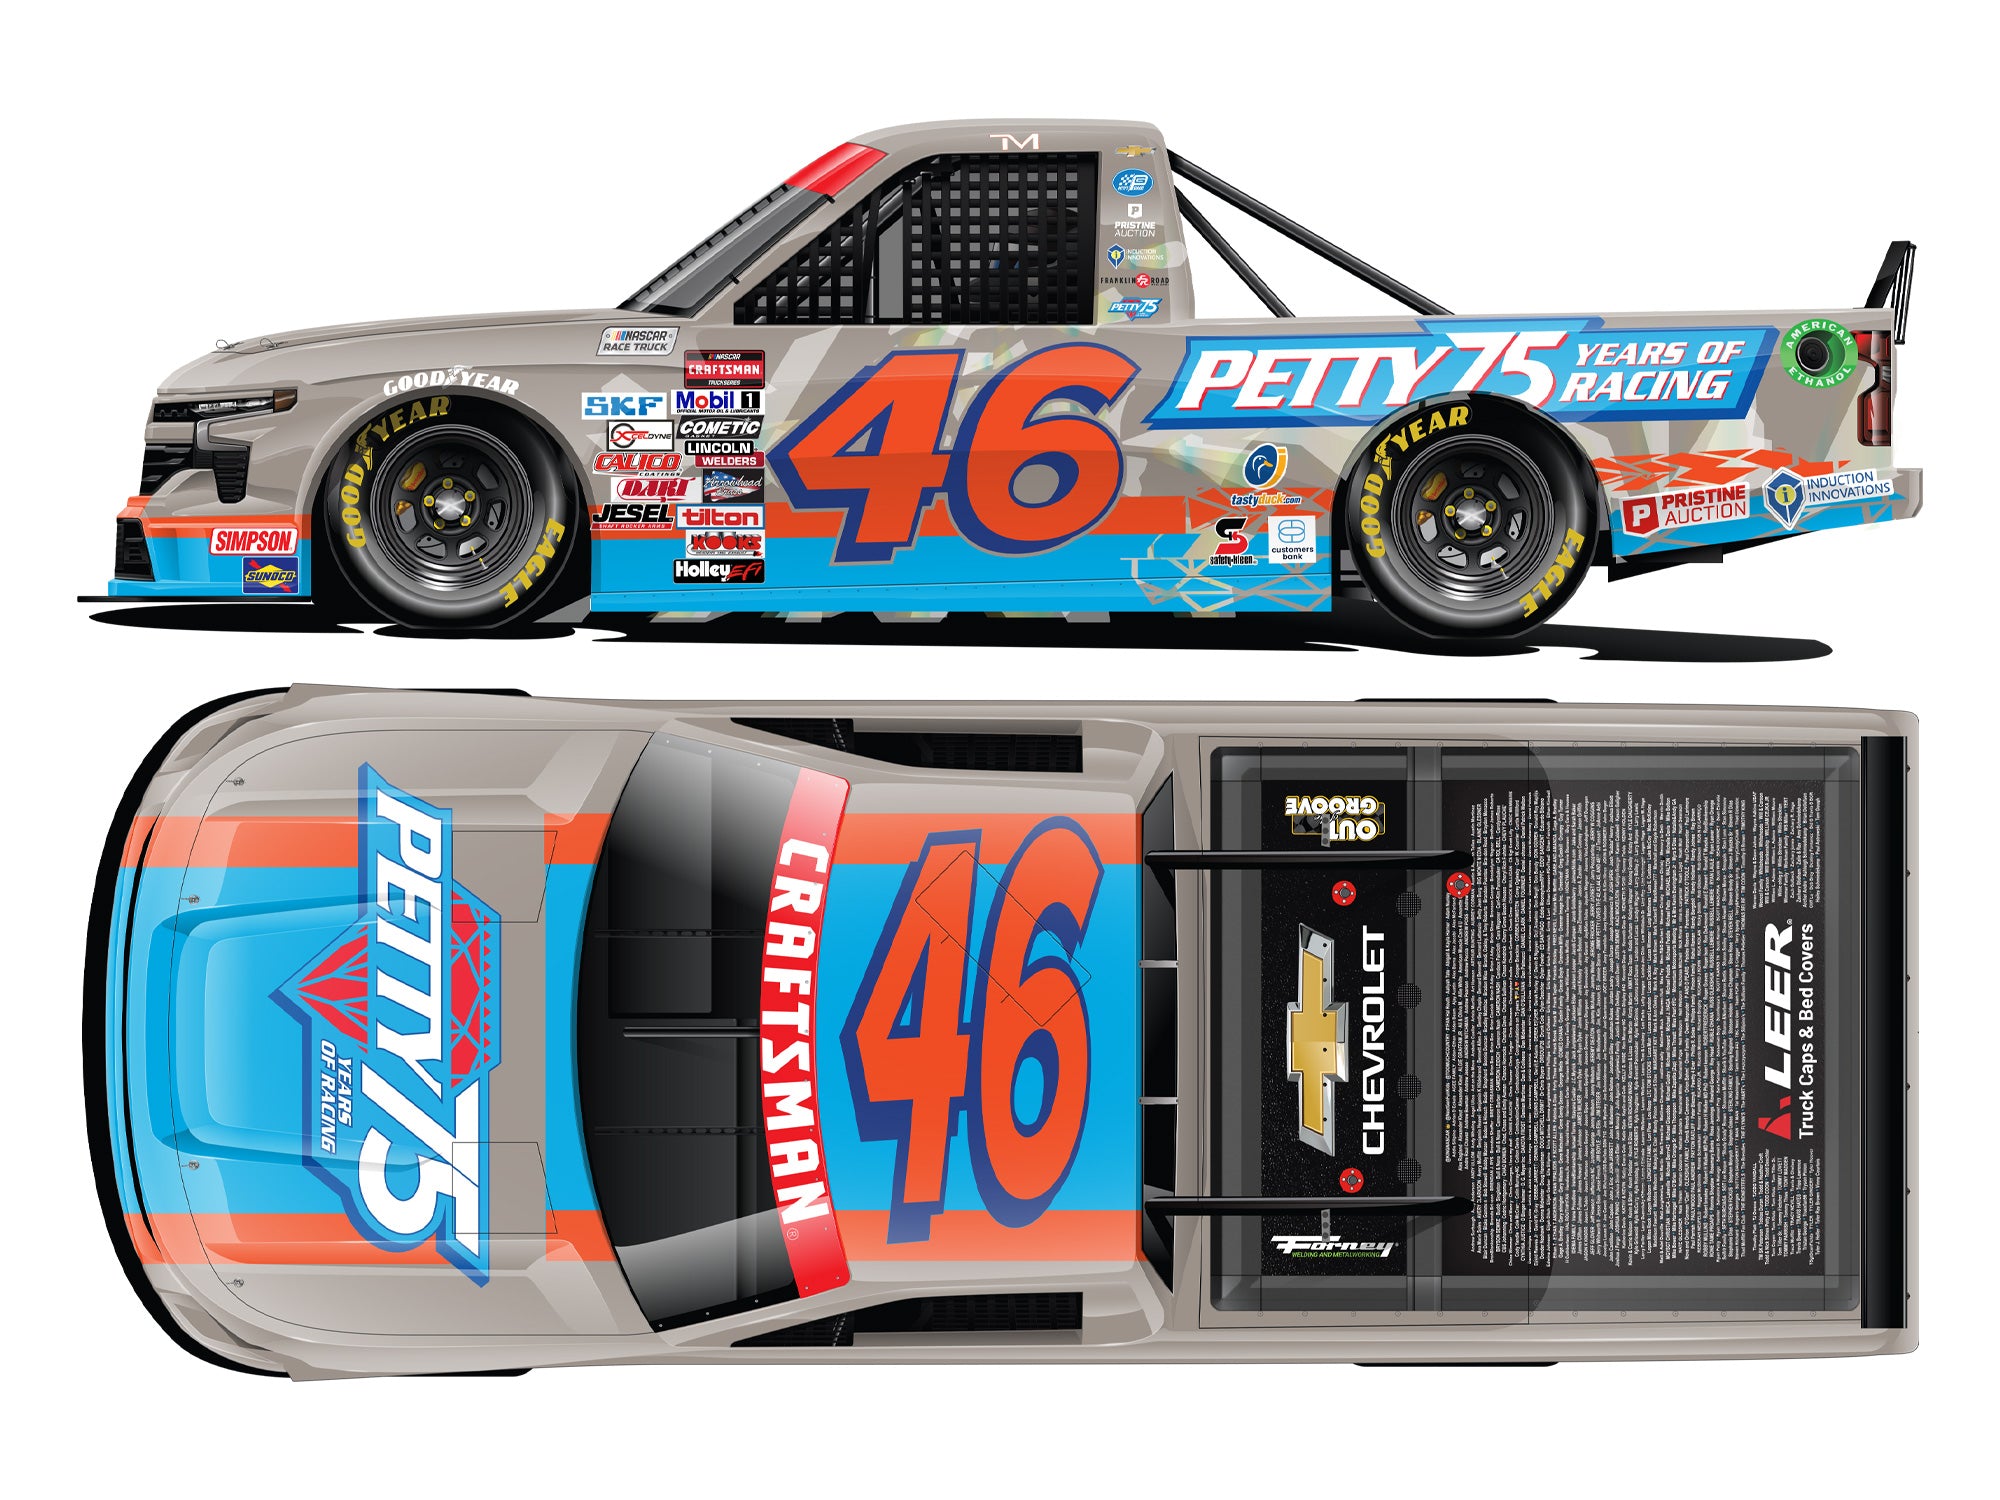 Lionel Racing - NASCAR Craftsman Truck Series 2024 - Thad Moffitt - #46 Petty 75 Years of Racing Throwback